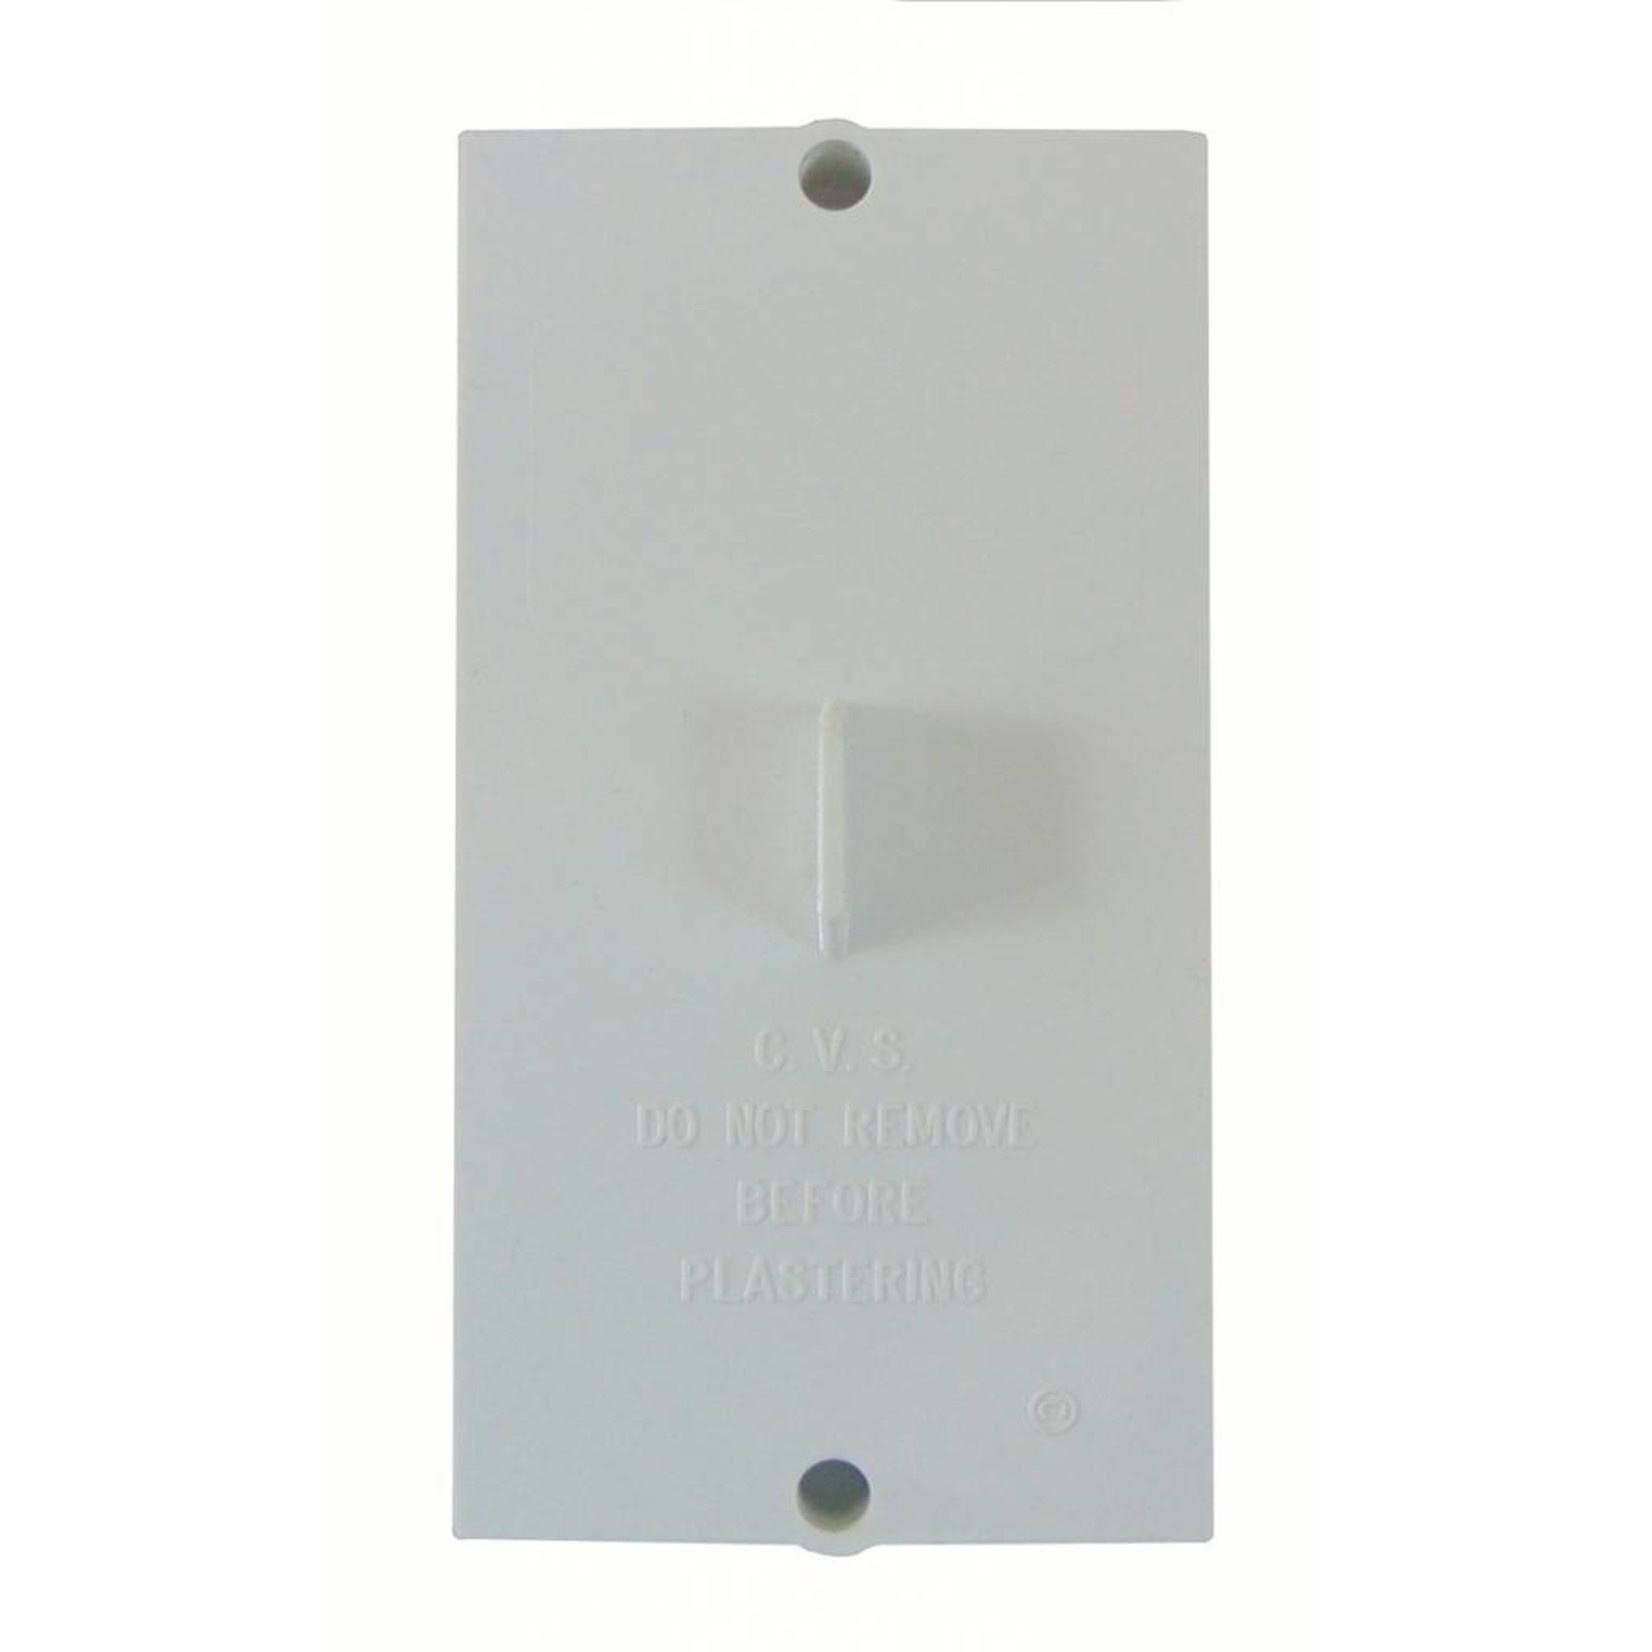 Hayden Central Vacuum Inlet Valve Cover Plate - White